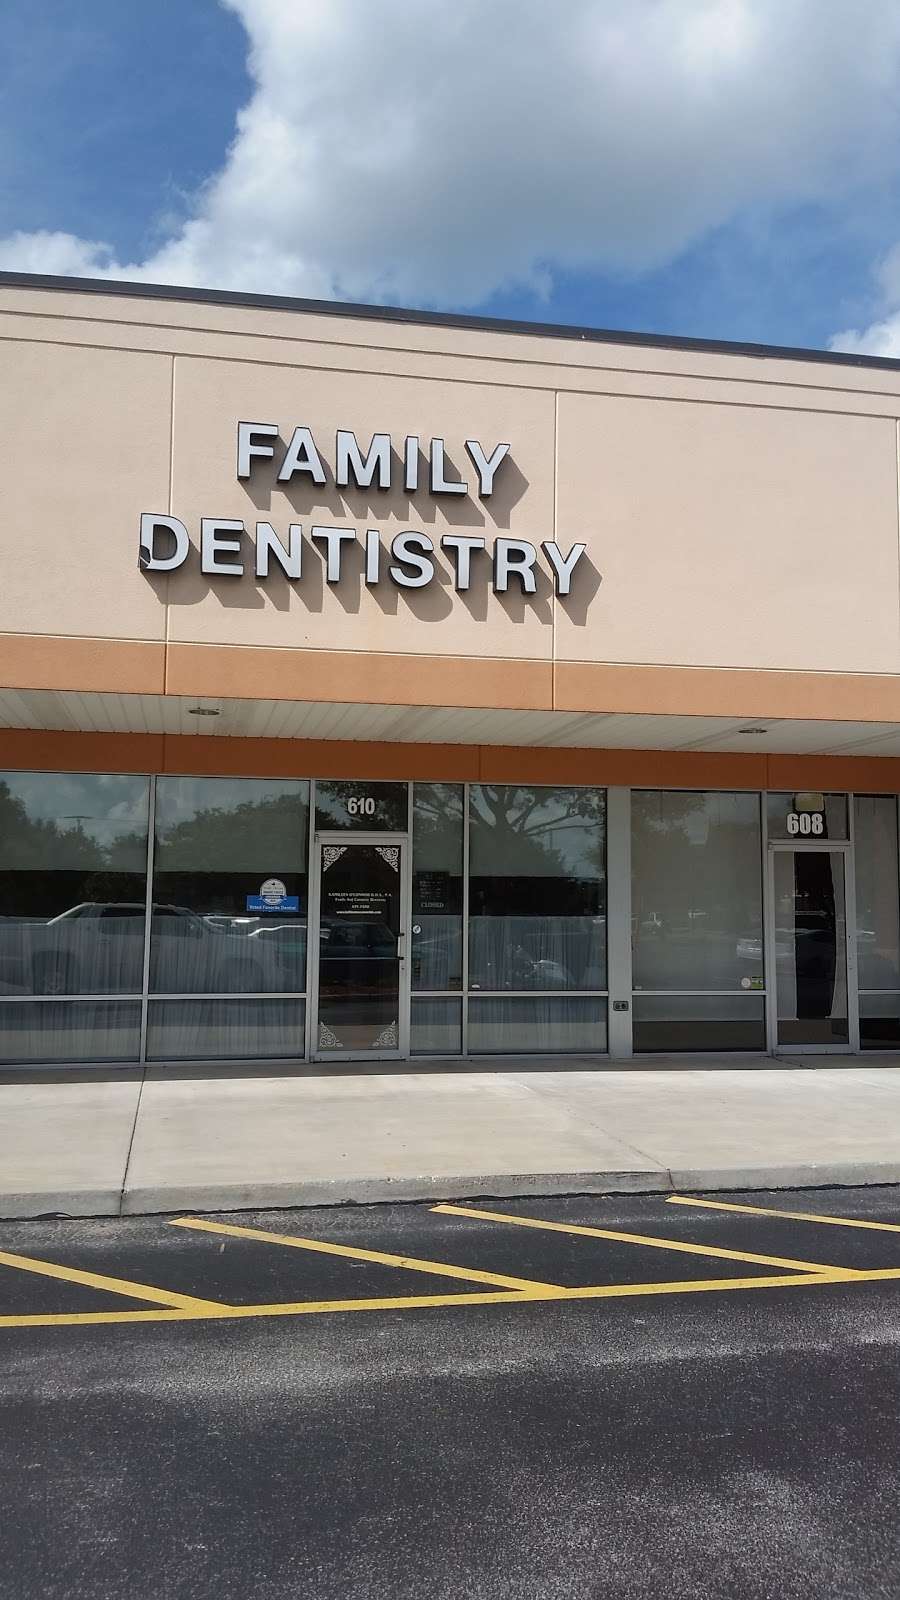 Serenity Family Dentistry | 3650 Murrell Rd Suite 124, Rockledge, FL 32955, USA | Phone: (321) 639-7400